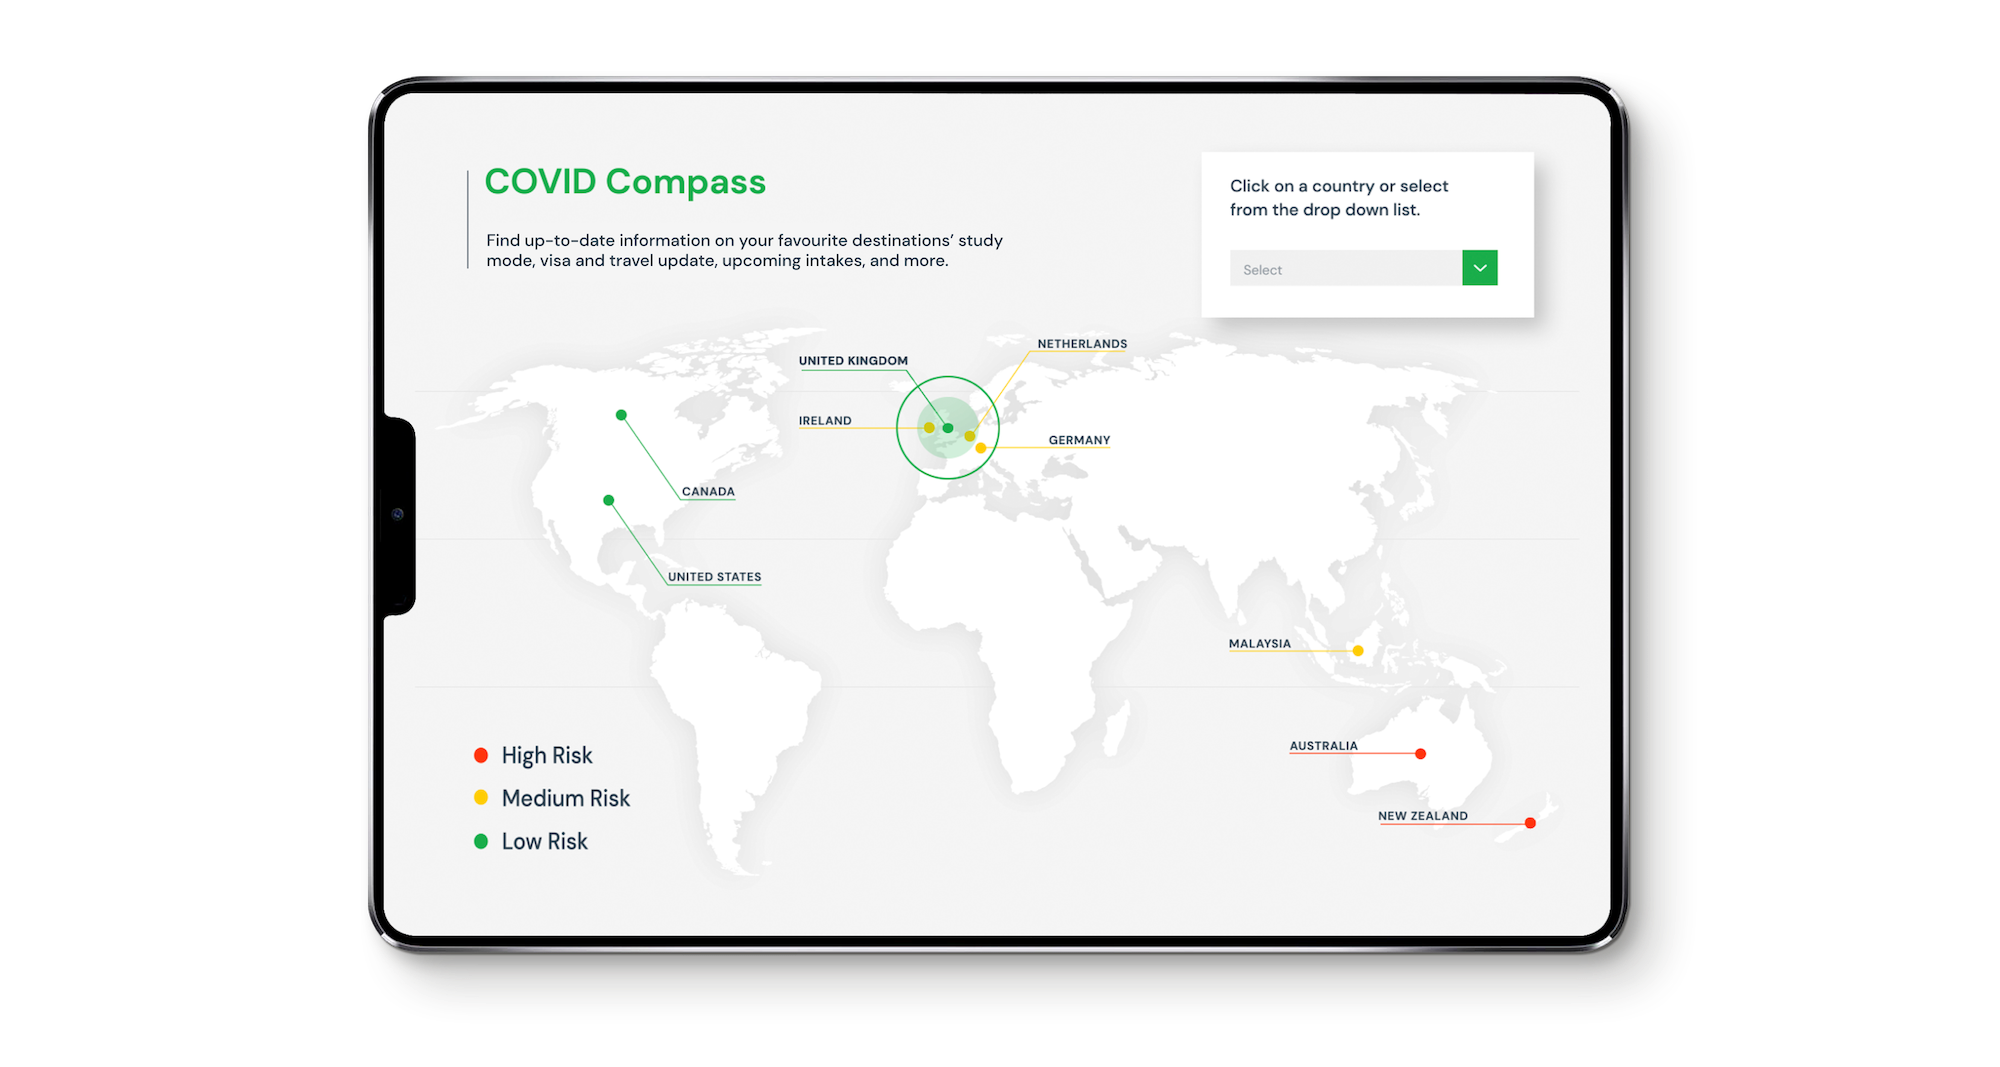 Introducing COVID Compass